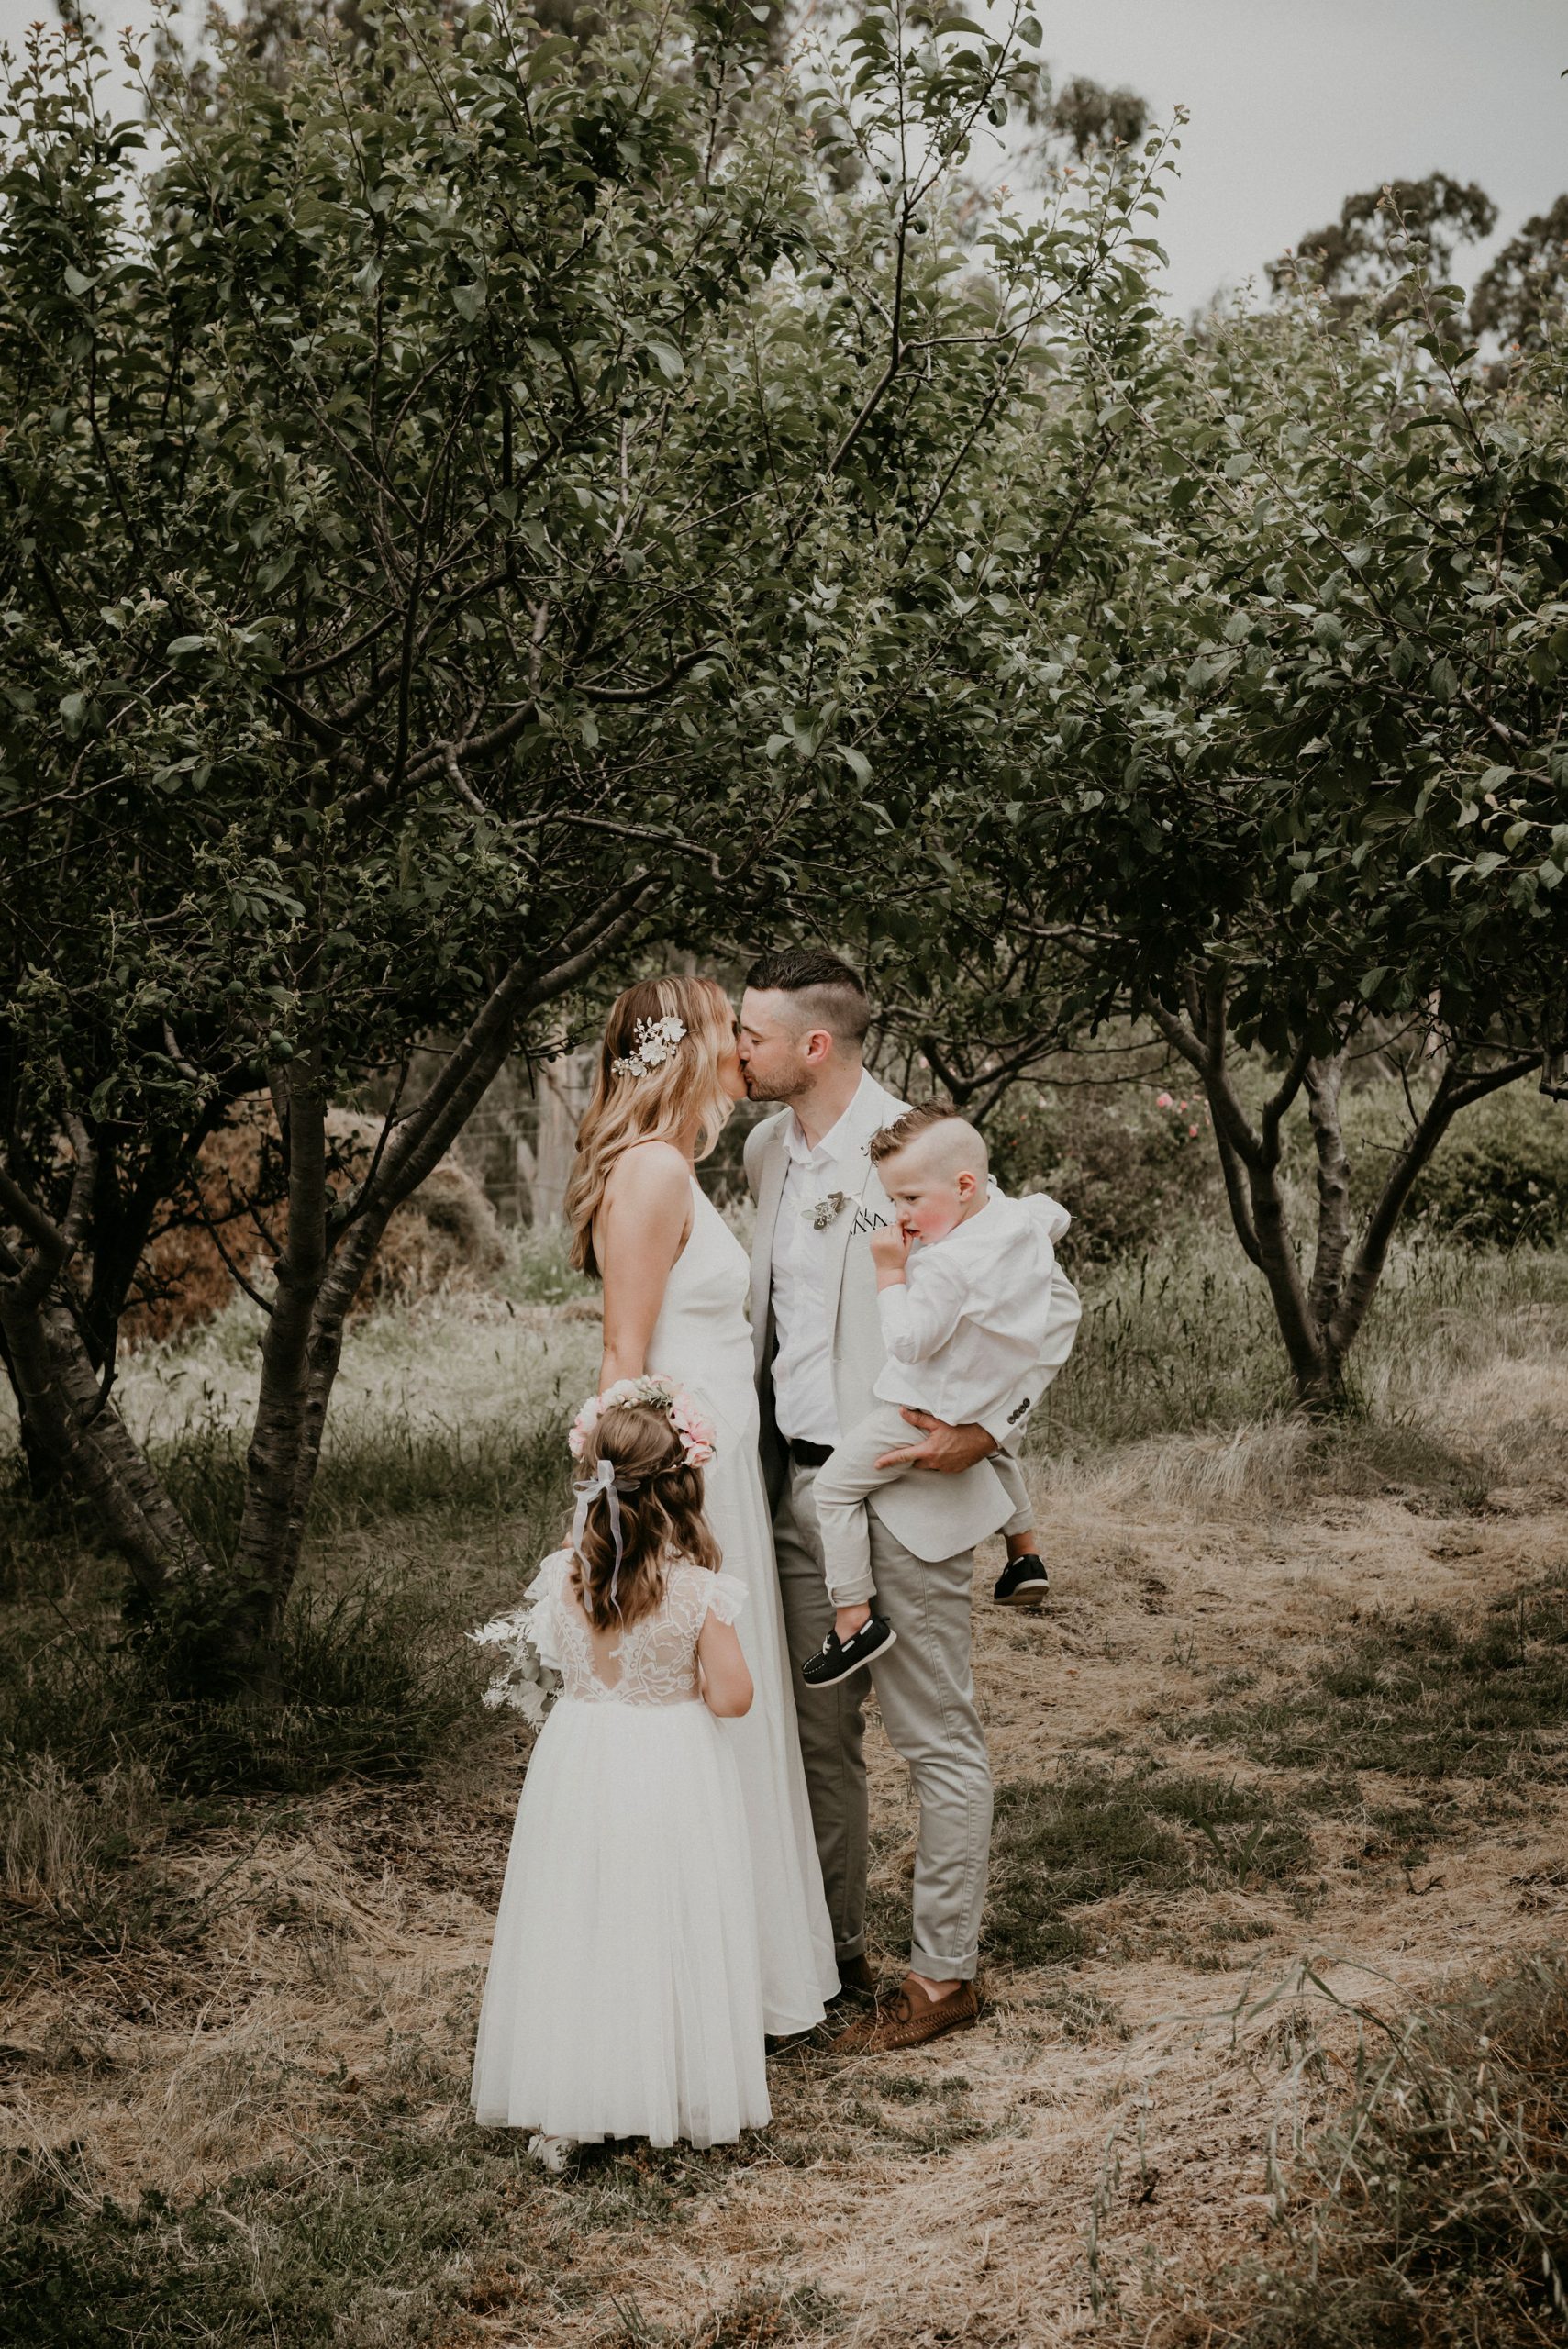 Elope with kids Lets Elope Melbourne Celebrant Photographer Elopement Package Victoria Sarah Matler Photography Orchard Farm Vigano weddings intimate